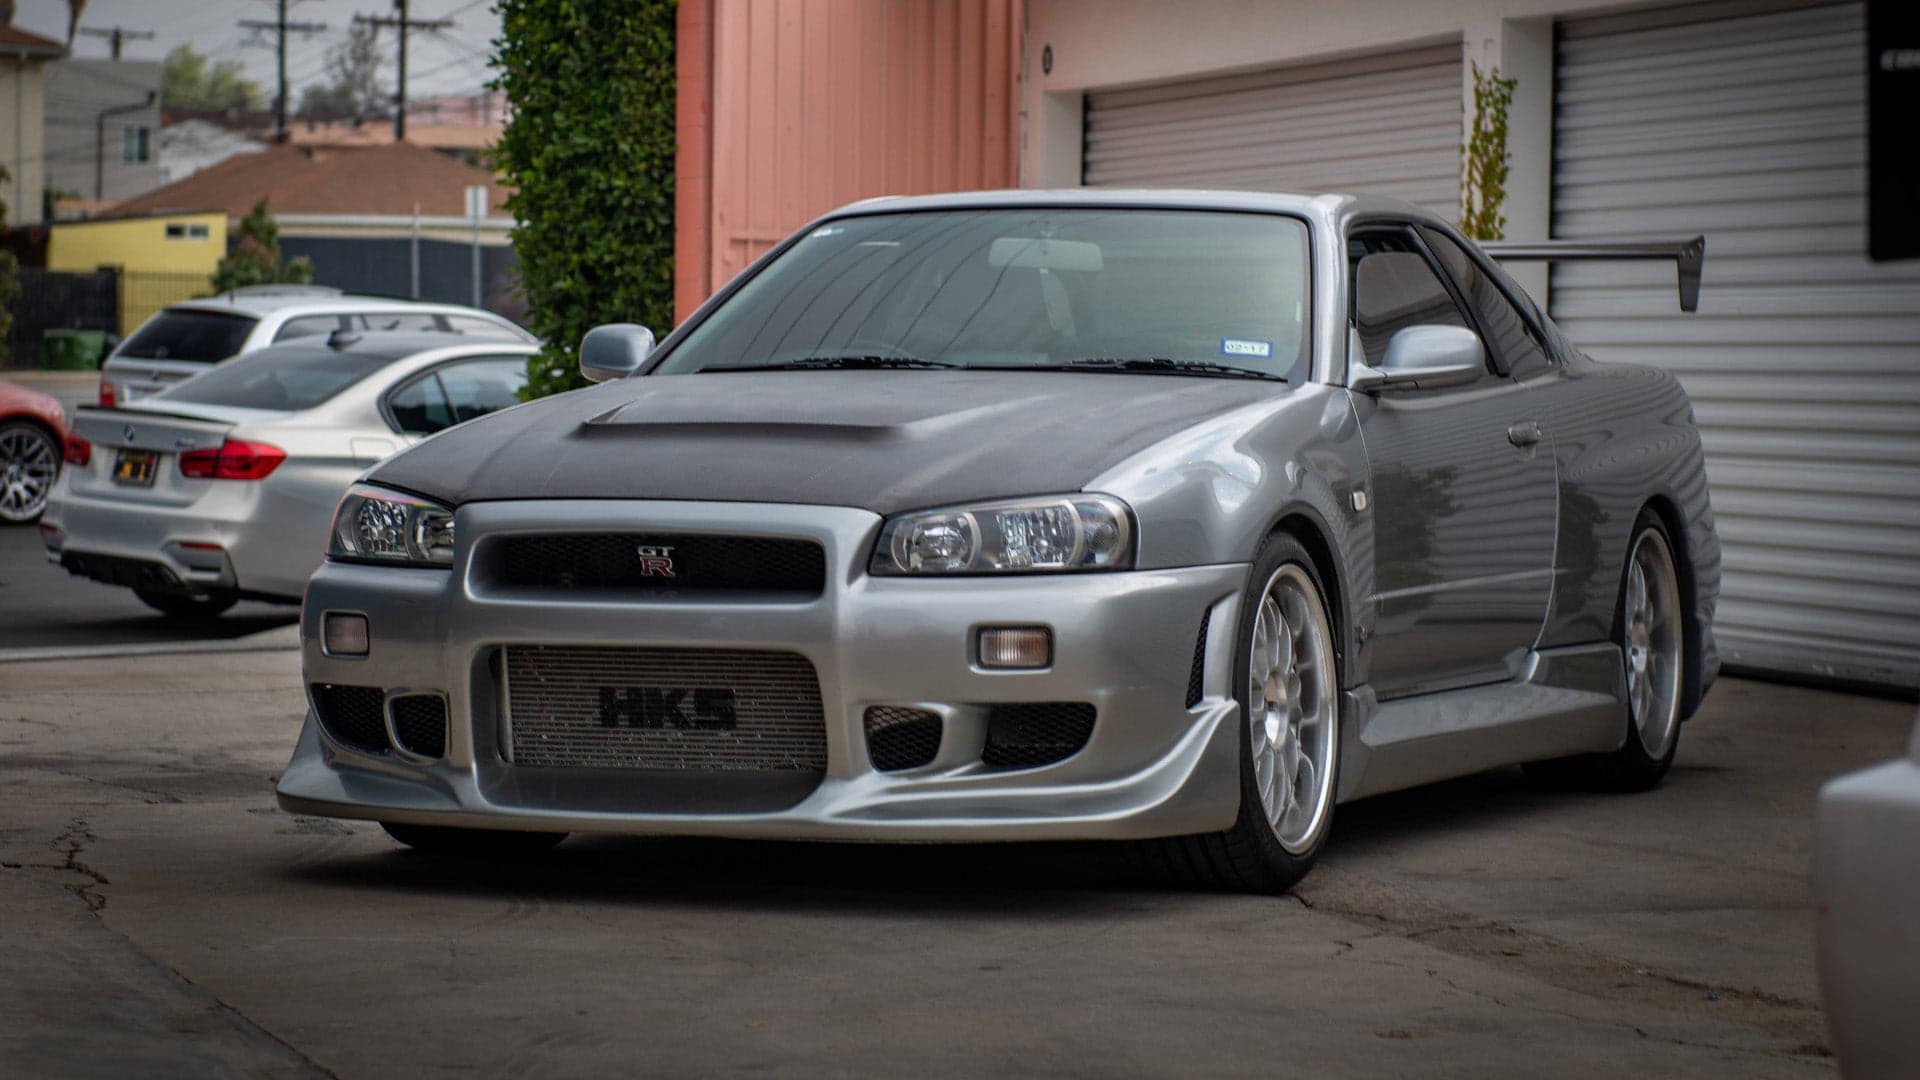 The Story Behind Paul Walker’s Two US-Legal Nissan Skyline R34s